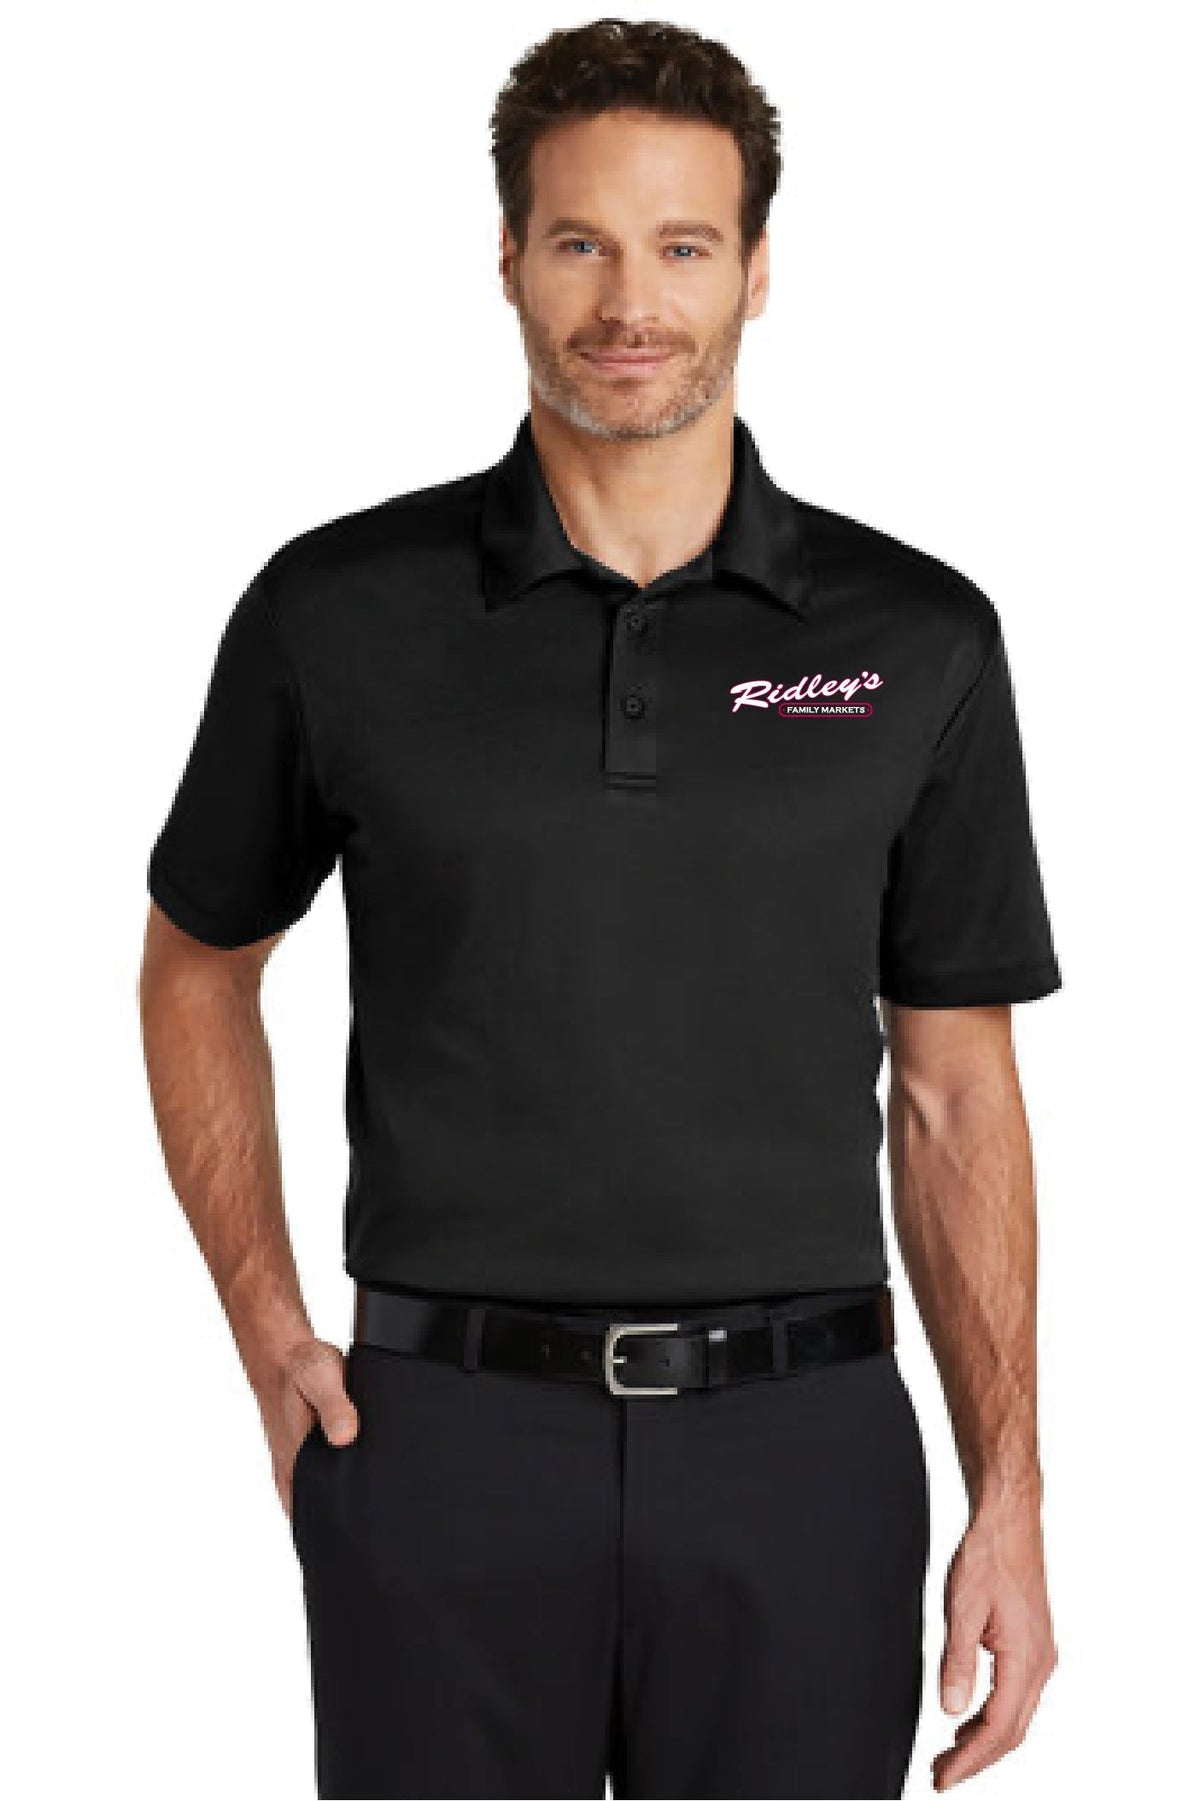 Ridley&#39;s - K540 Men&#39;s Silk Touch Performance Polo